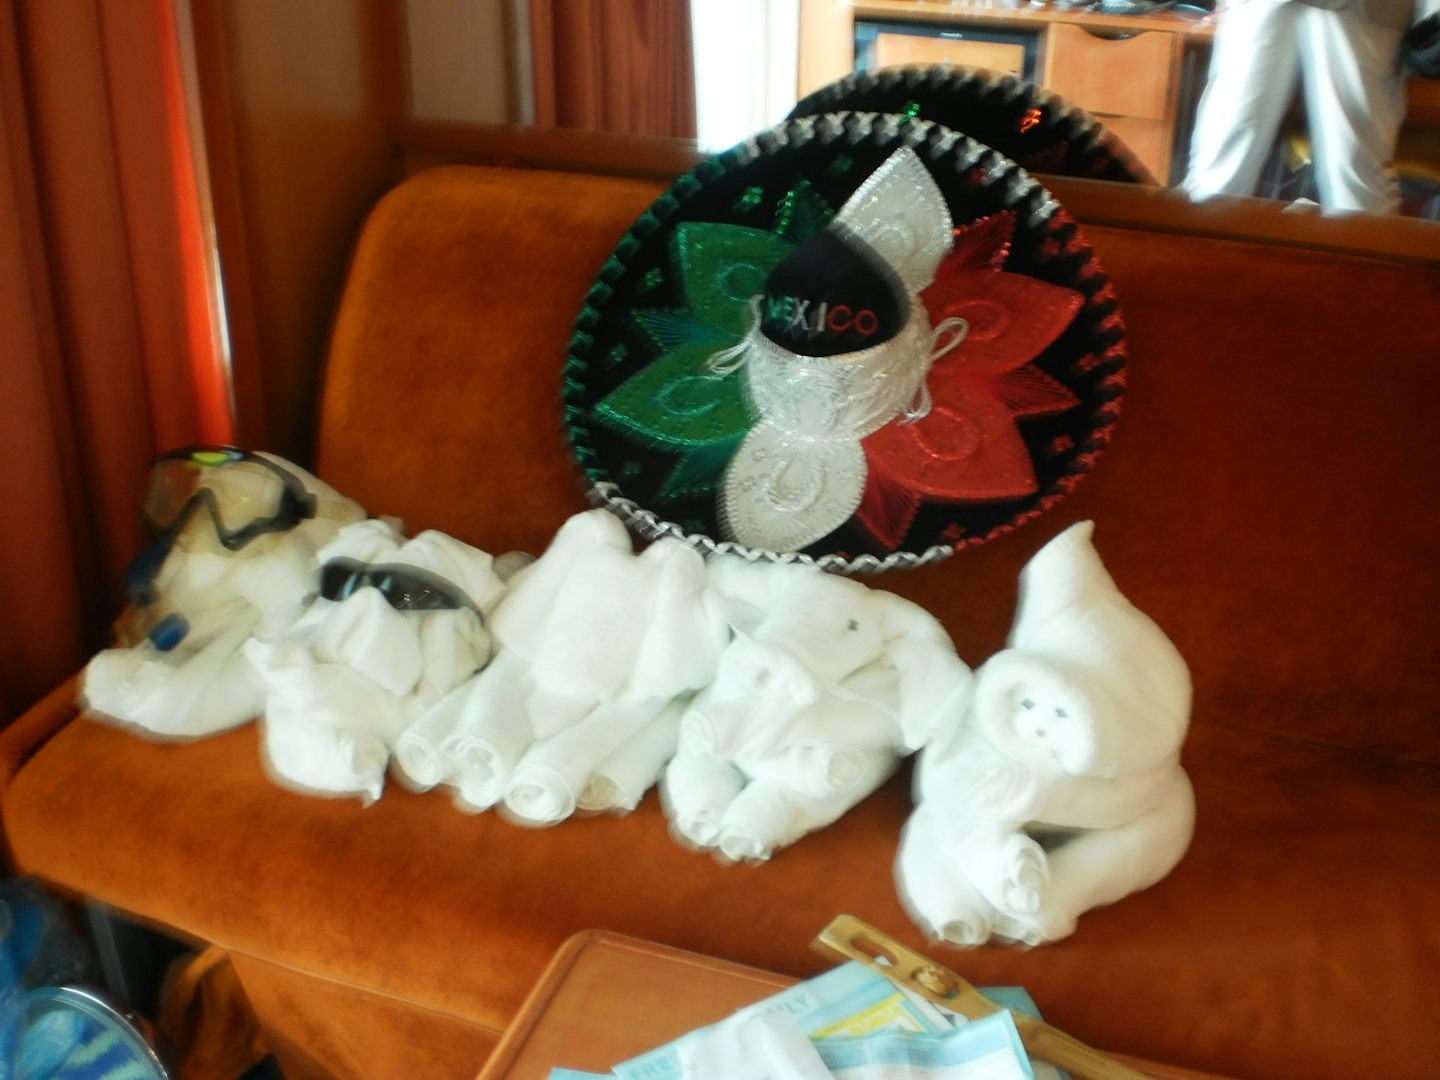 All the towel animals hanging out ton the sofa